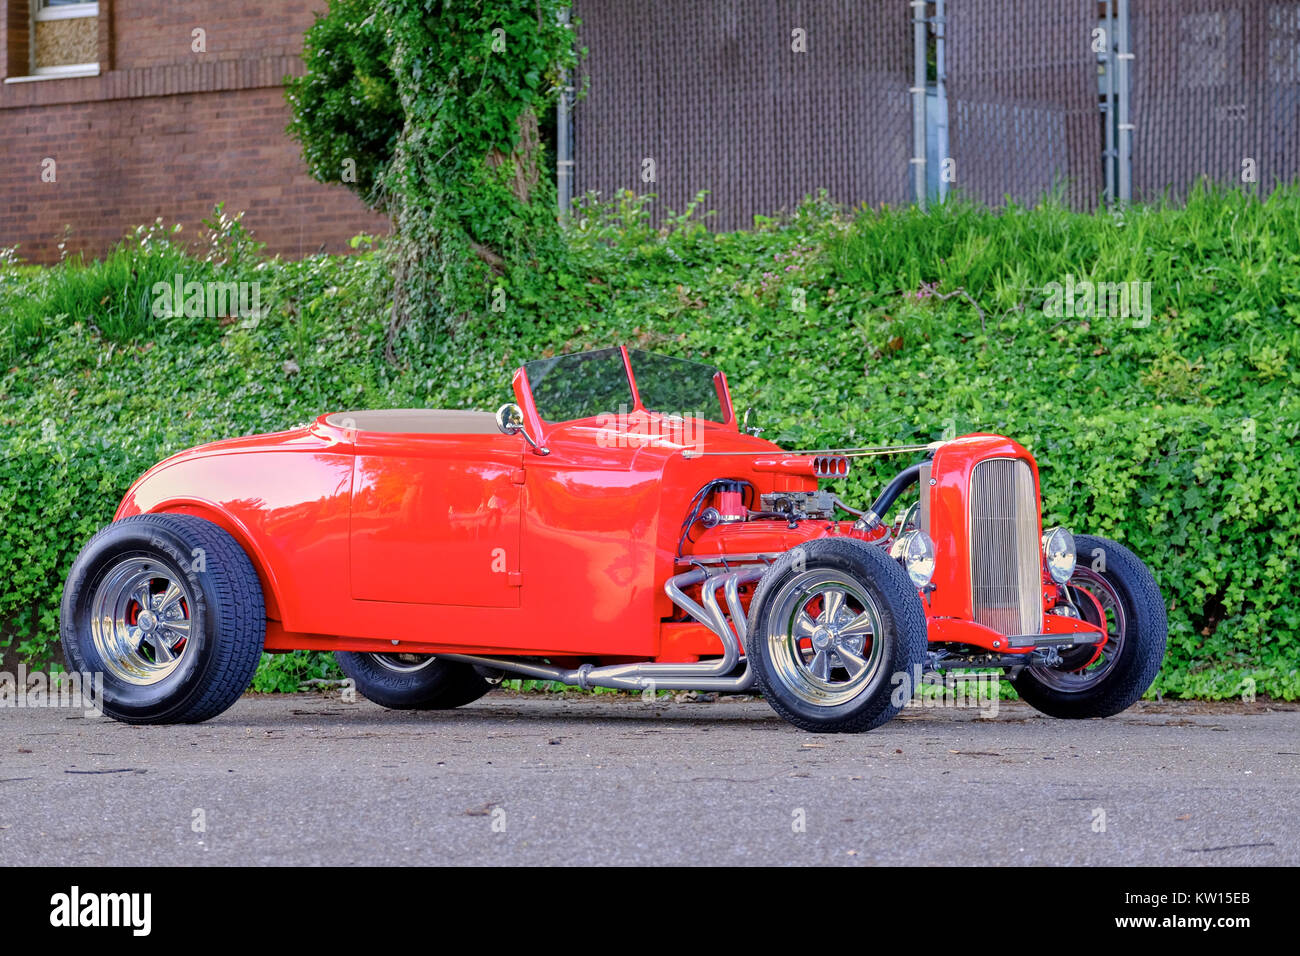 1932 red Ford hot rod roadster on side view display showing open engine compartment. Stock Photo